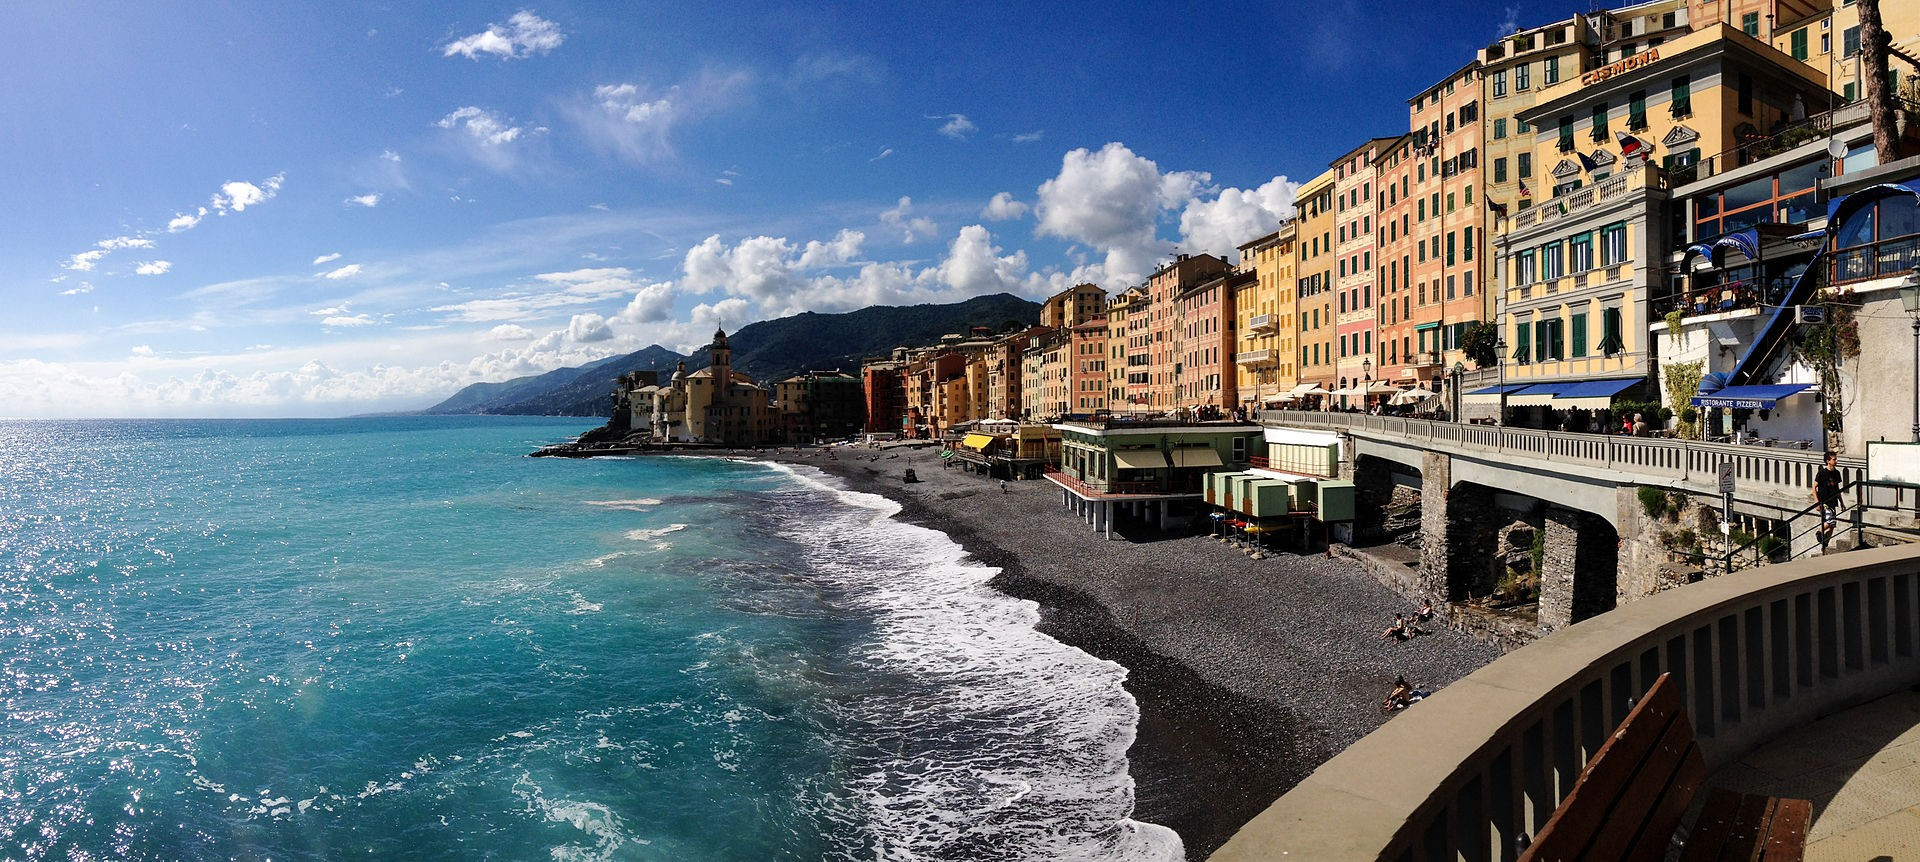 By Michal Osmenda from Brussels, Belgium - Camogli, Liguria, CC BY 2.0, https://commons.wikimedia.org/w/index.php?curid=26358207